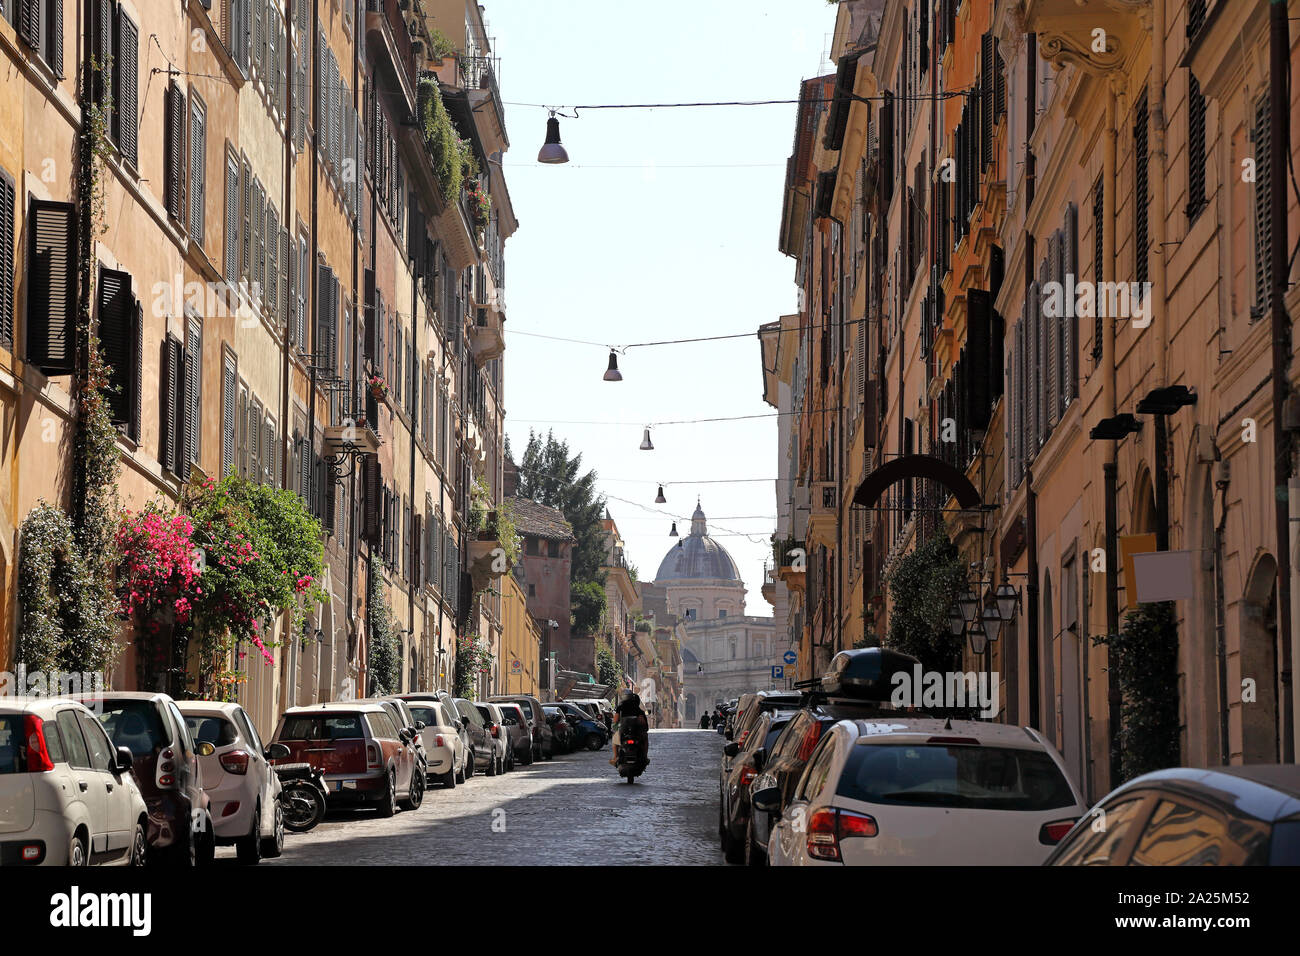 Rome, everyday life in the city. Stock Photo